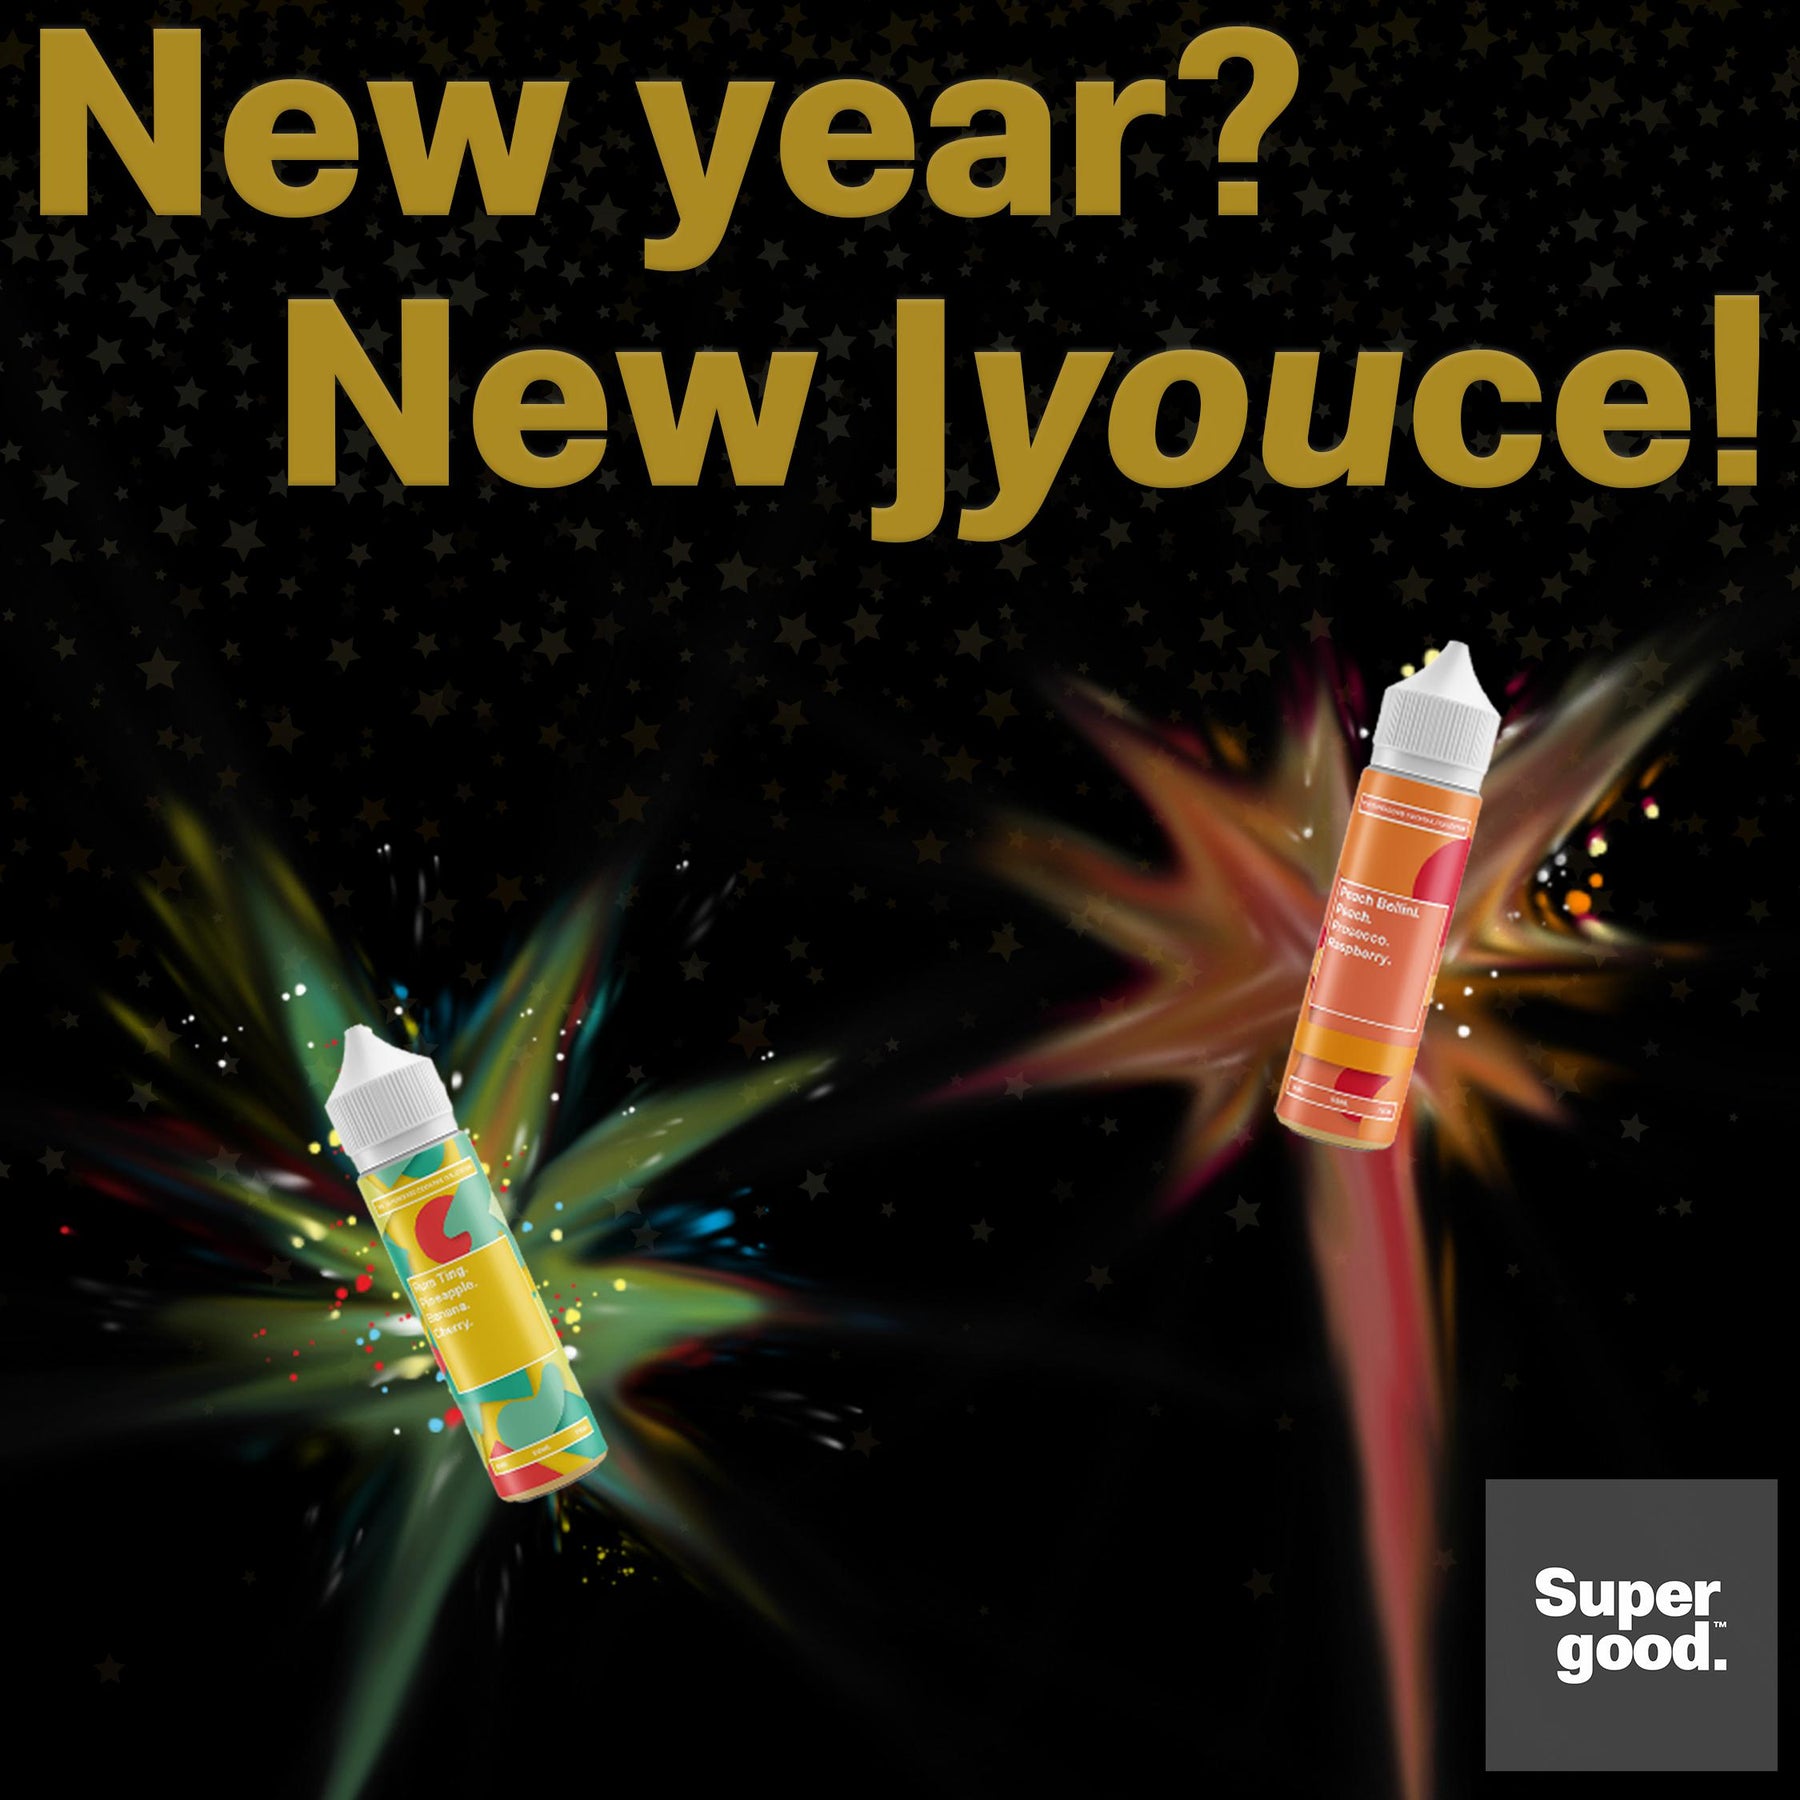 New Year? New Jyouce!